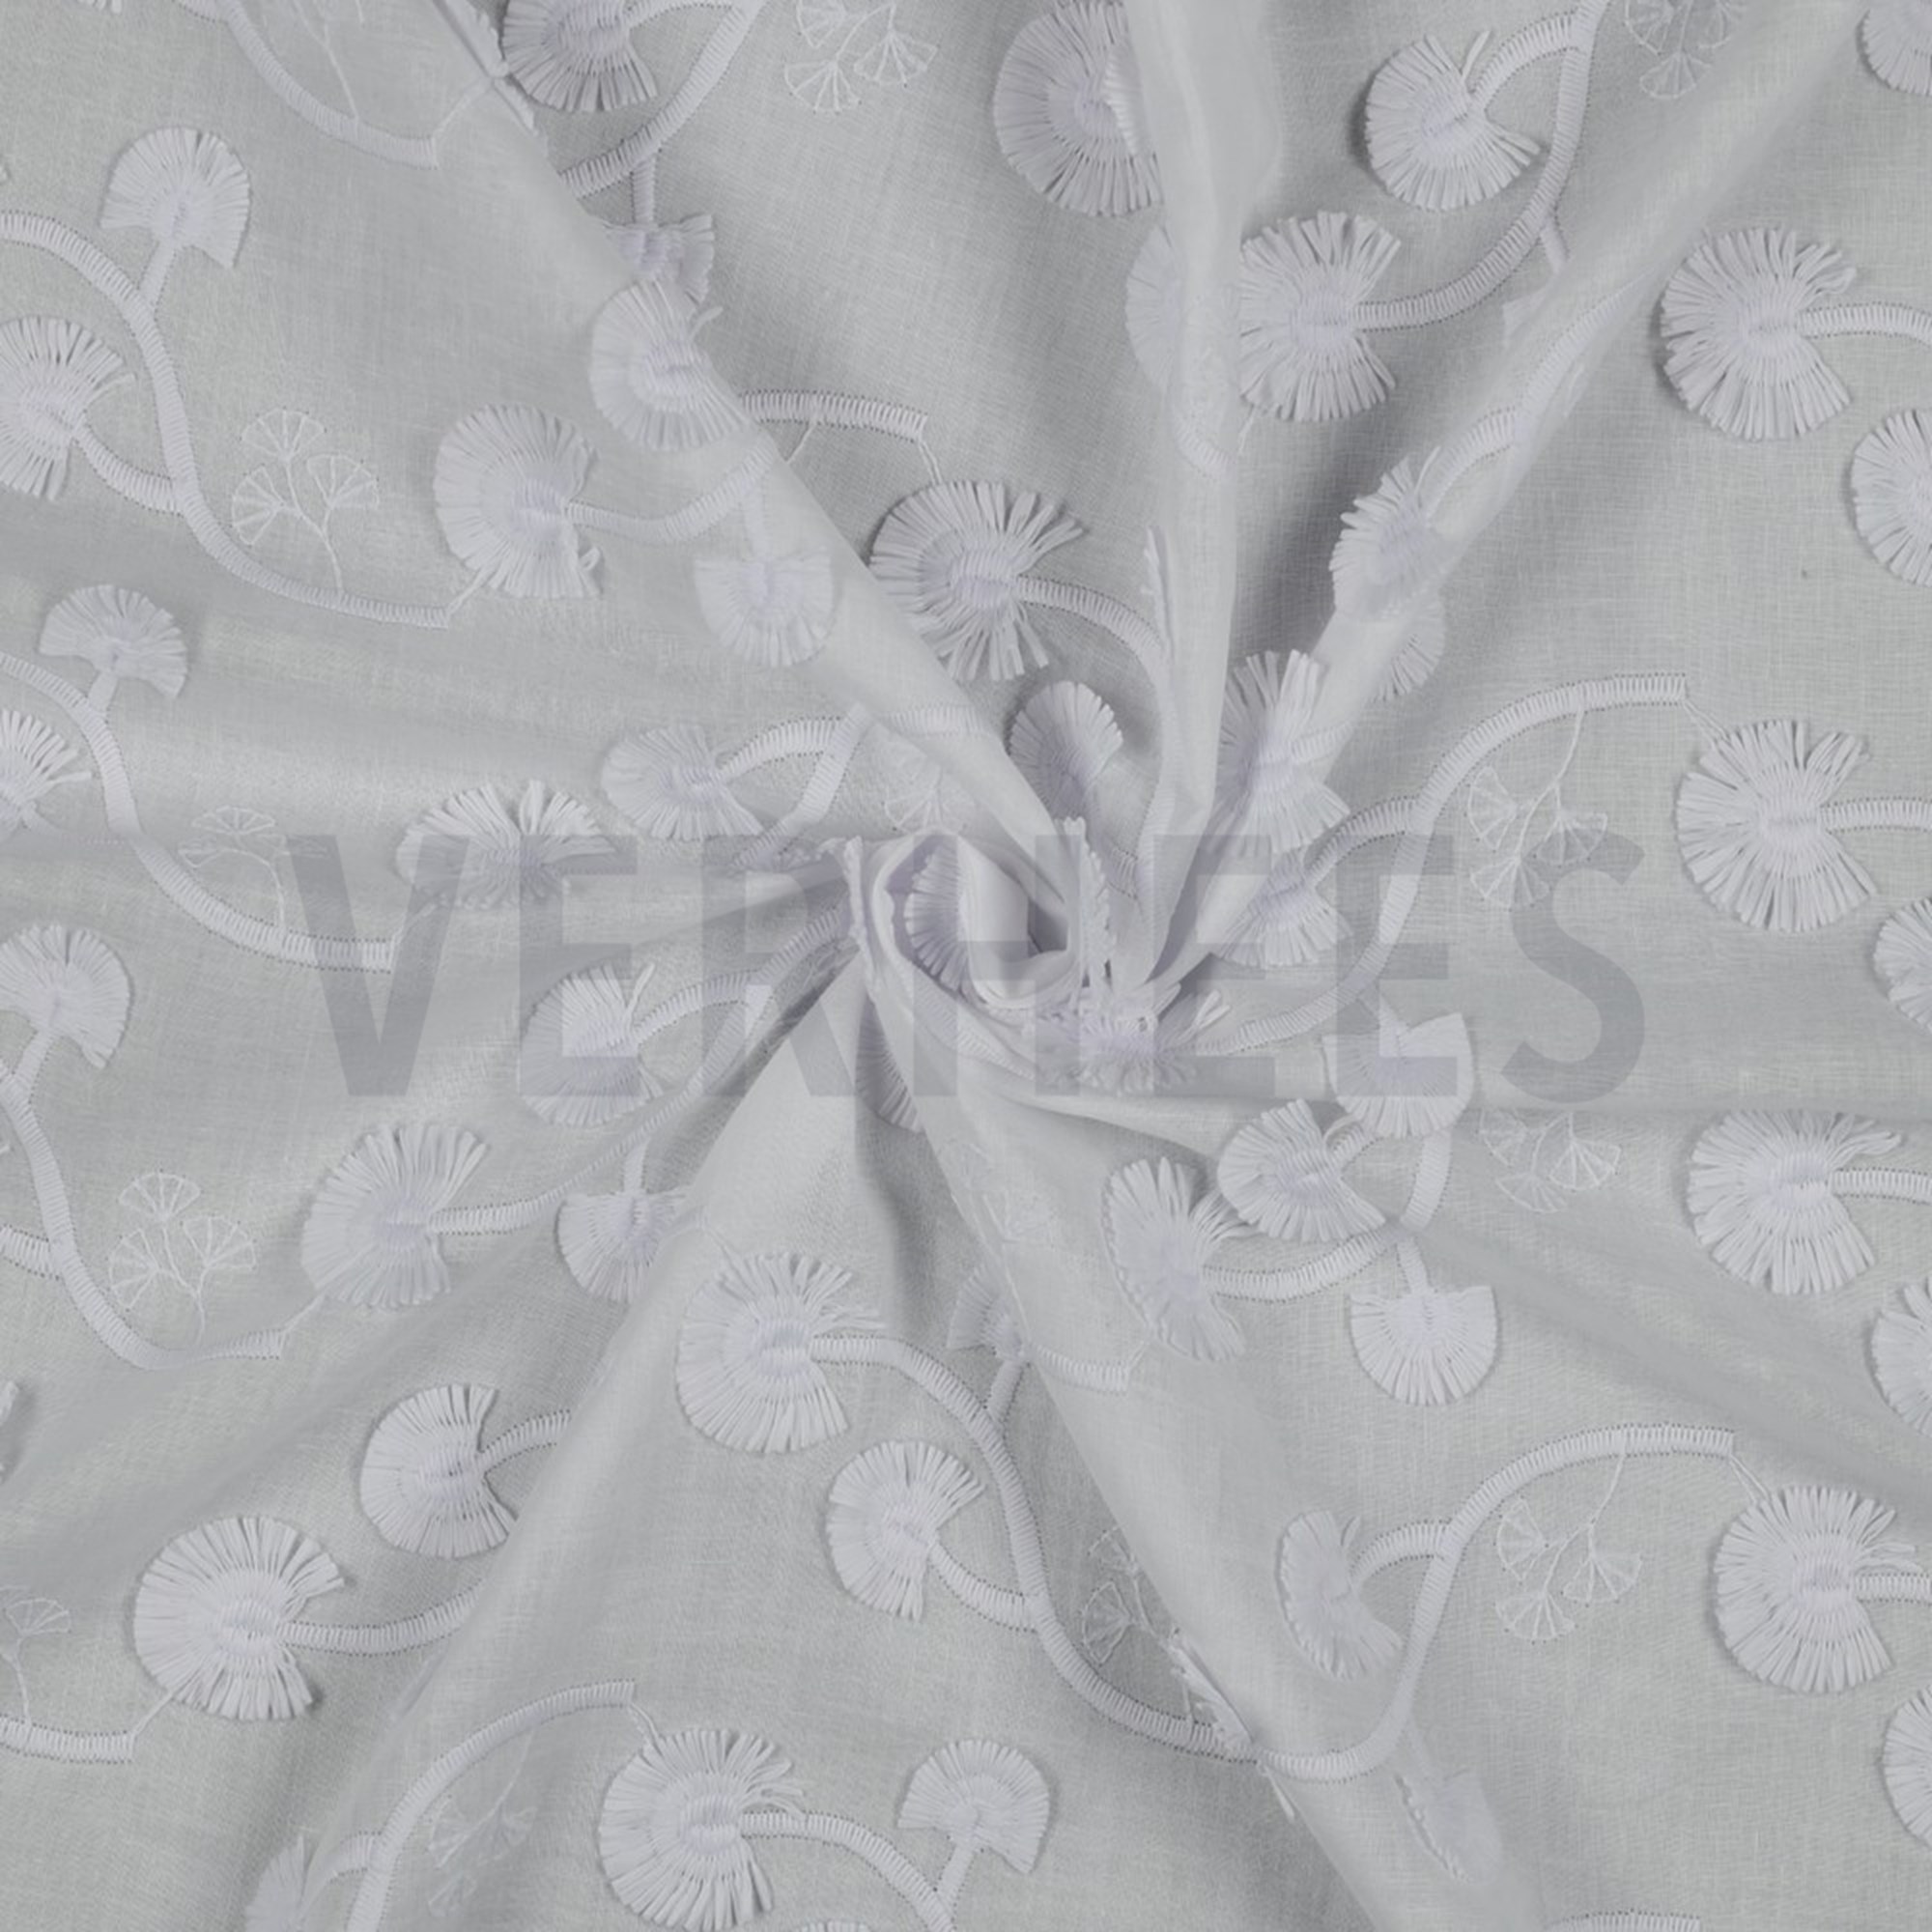 COTTON VOILE EMBROIDERY FLOWERS WHITE (high resolution) #2